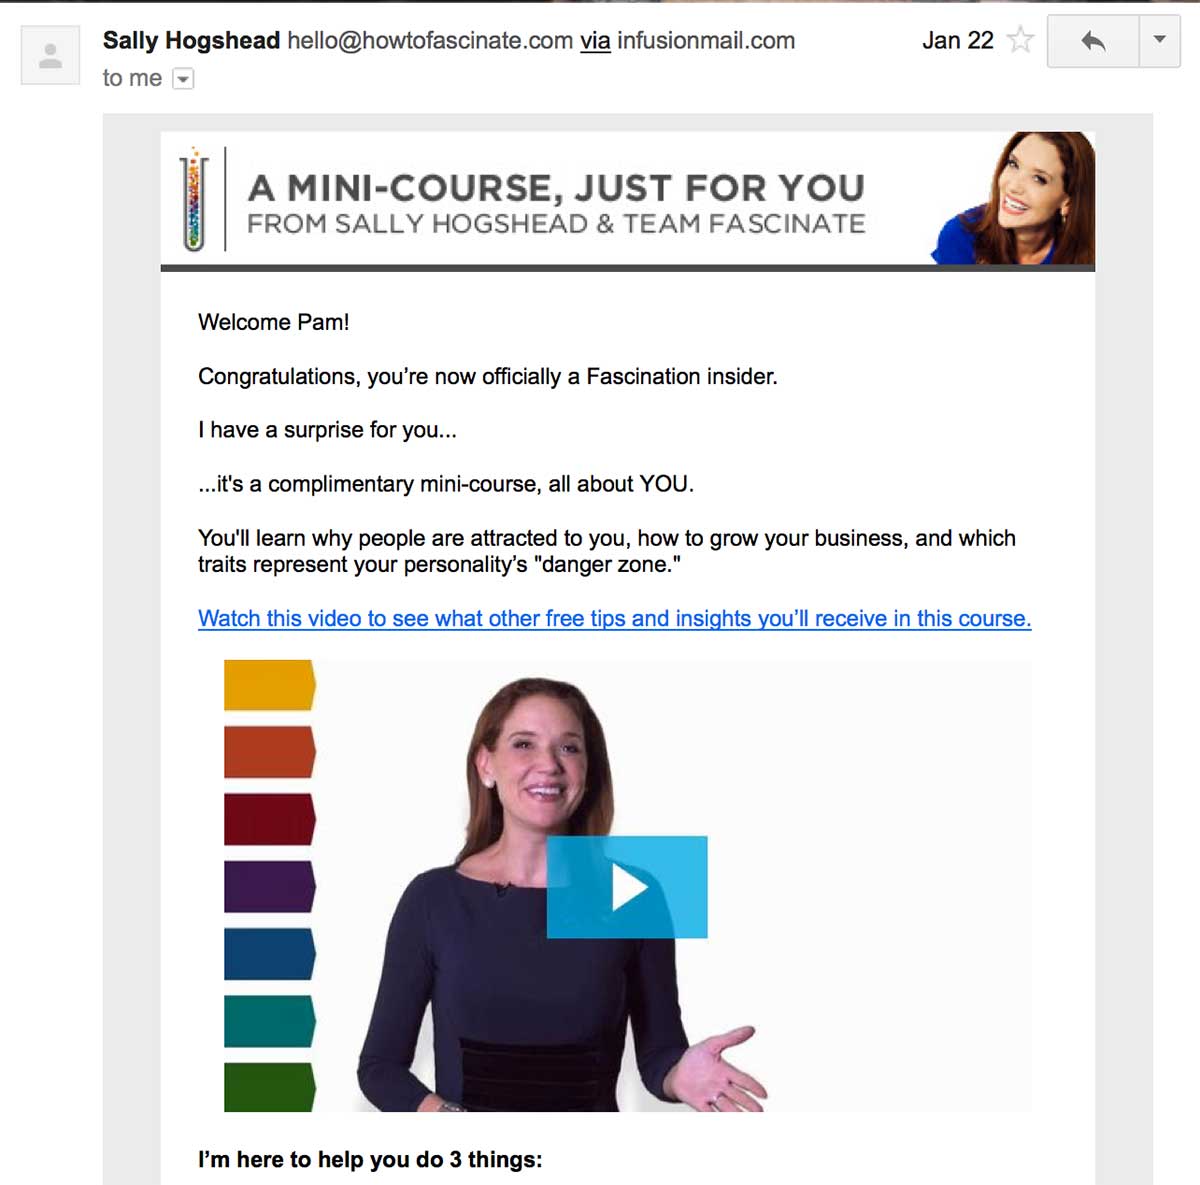 email marketing tricks this looks like a video, but actually it's just an image embedded in the email